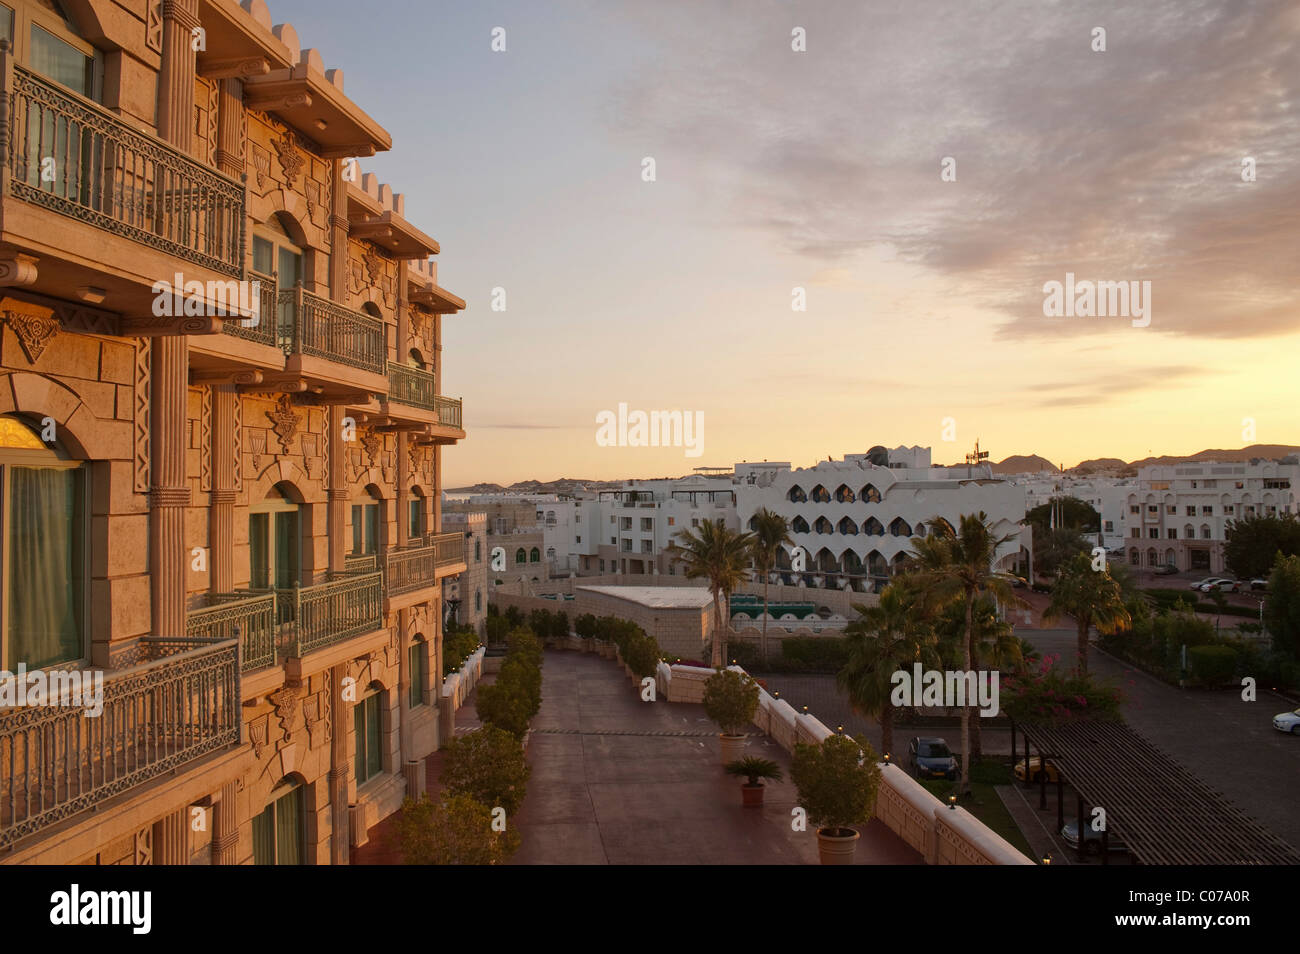 Facade of the Grand Hyatt Muscat early in the morning, Muscat, Oman, Middle East Stock Photo